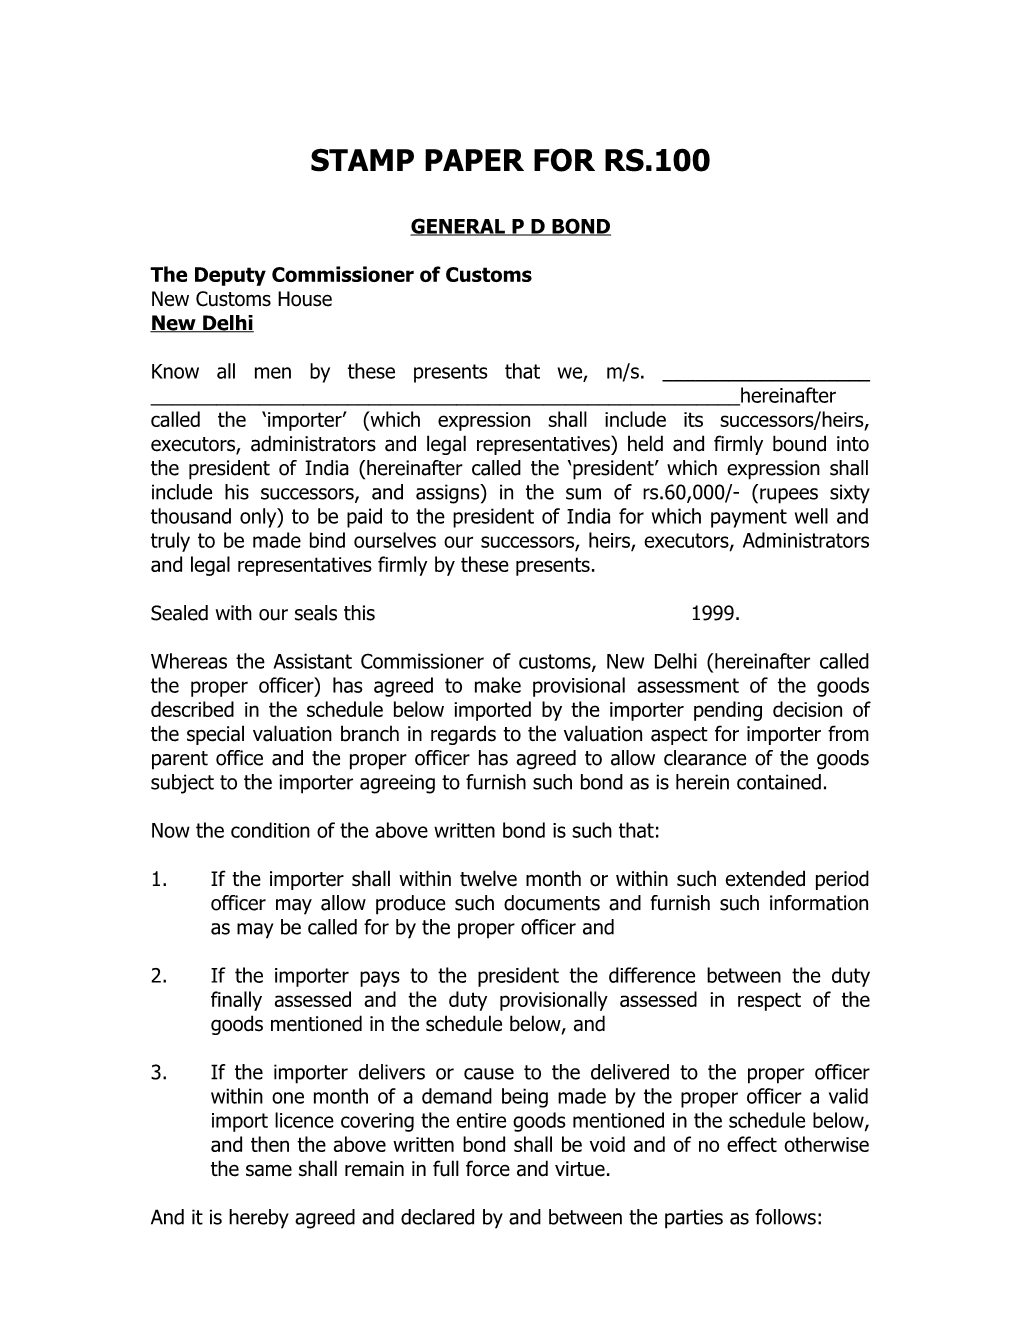 Stamp Paper for Rs.100